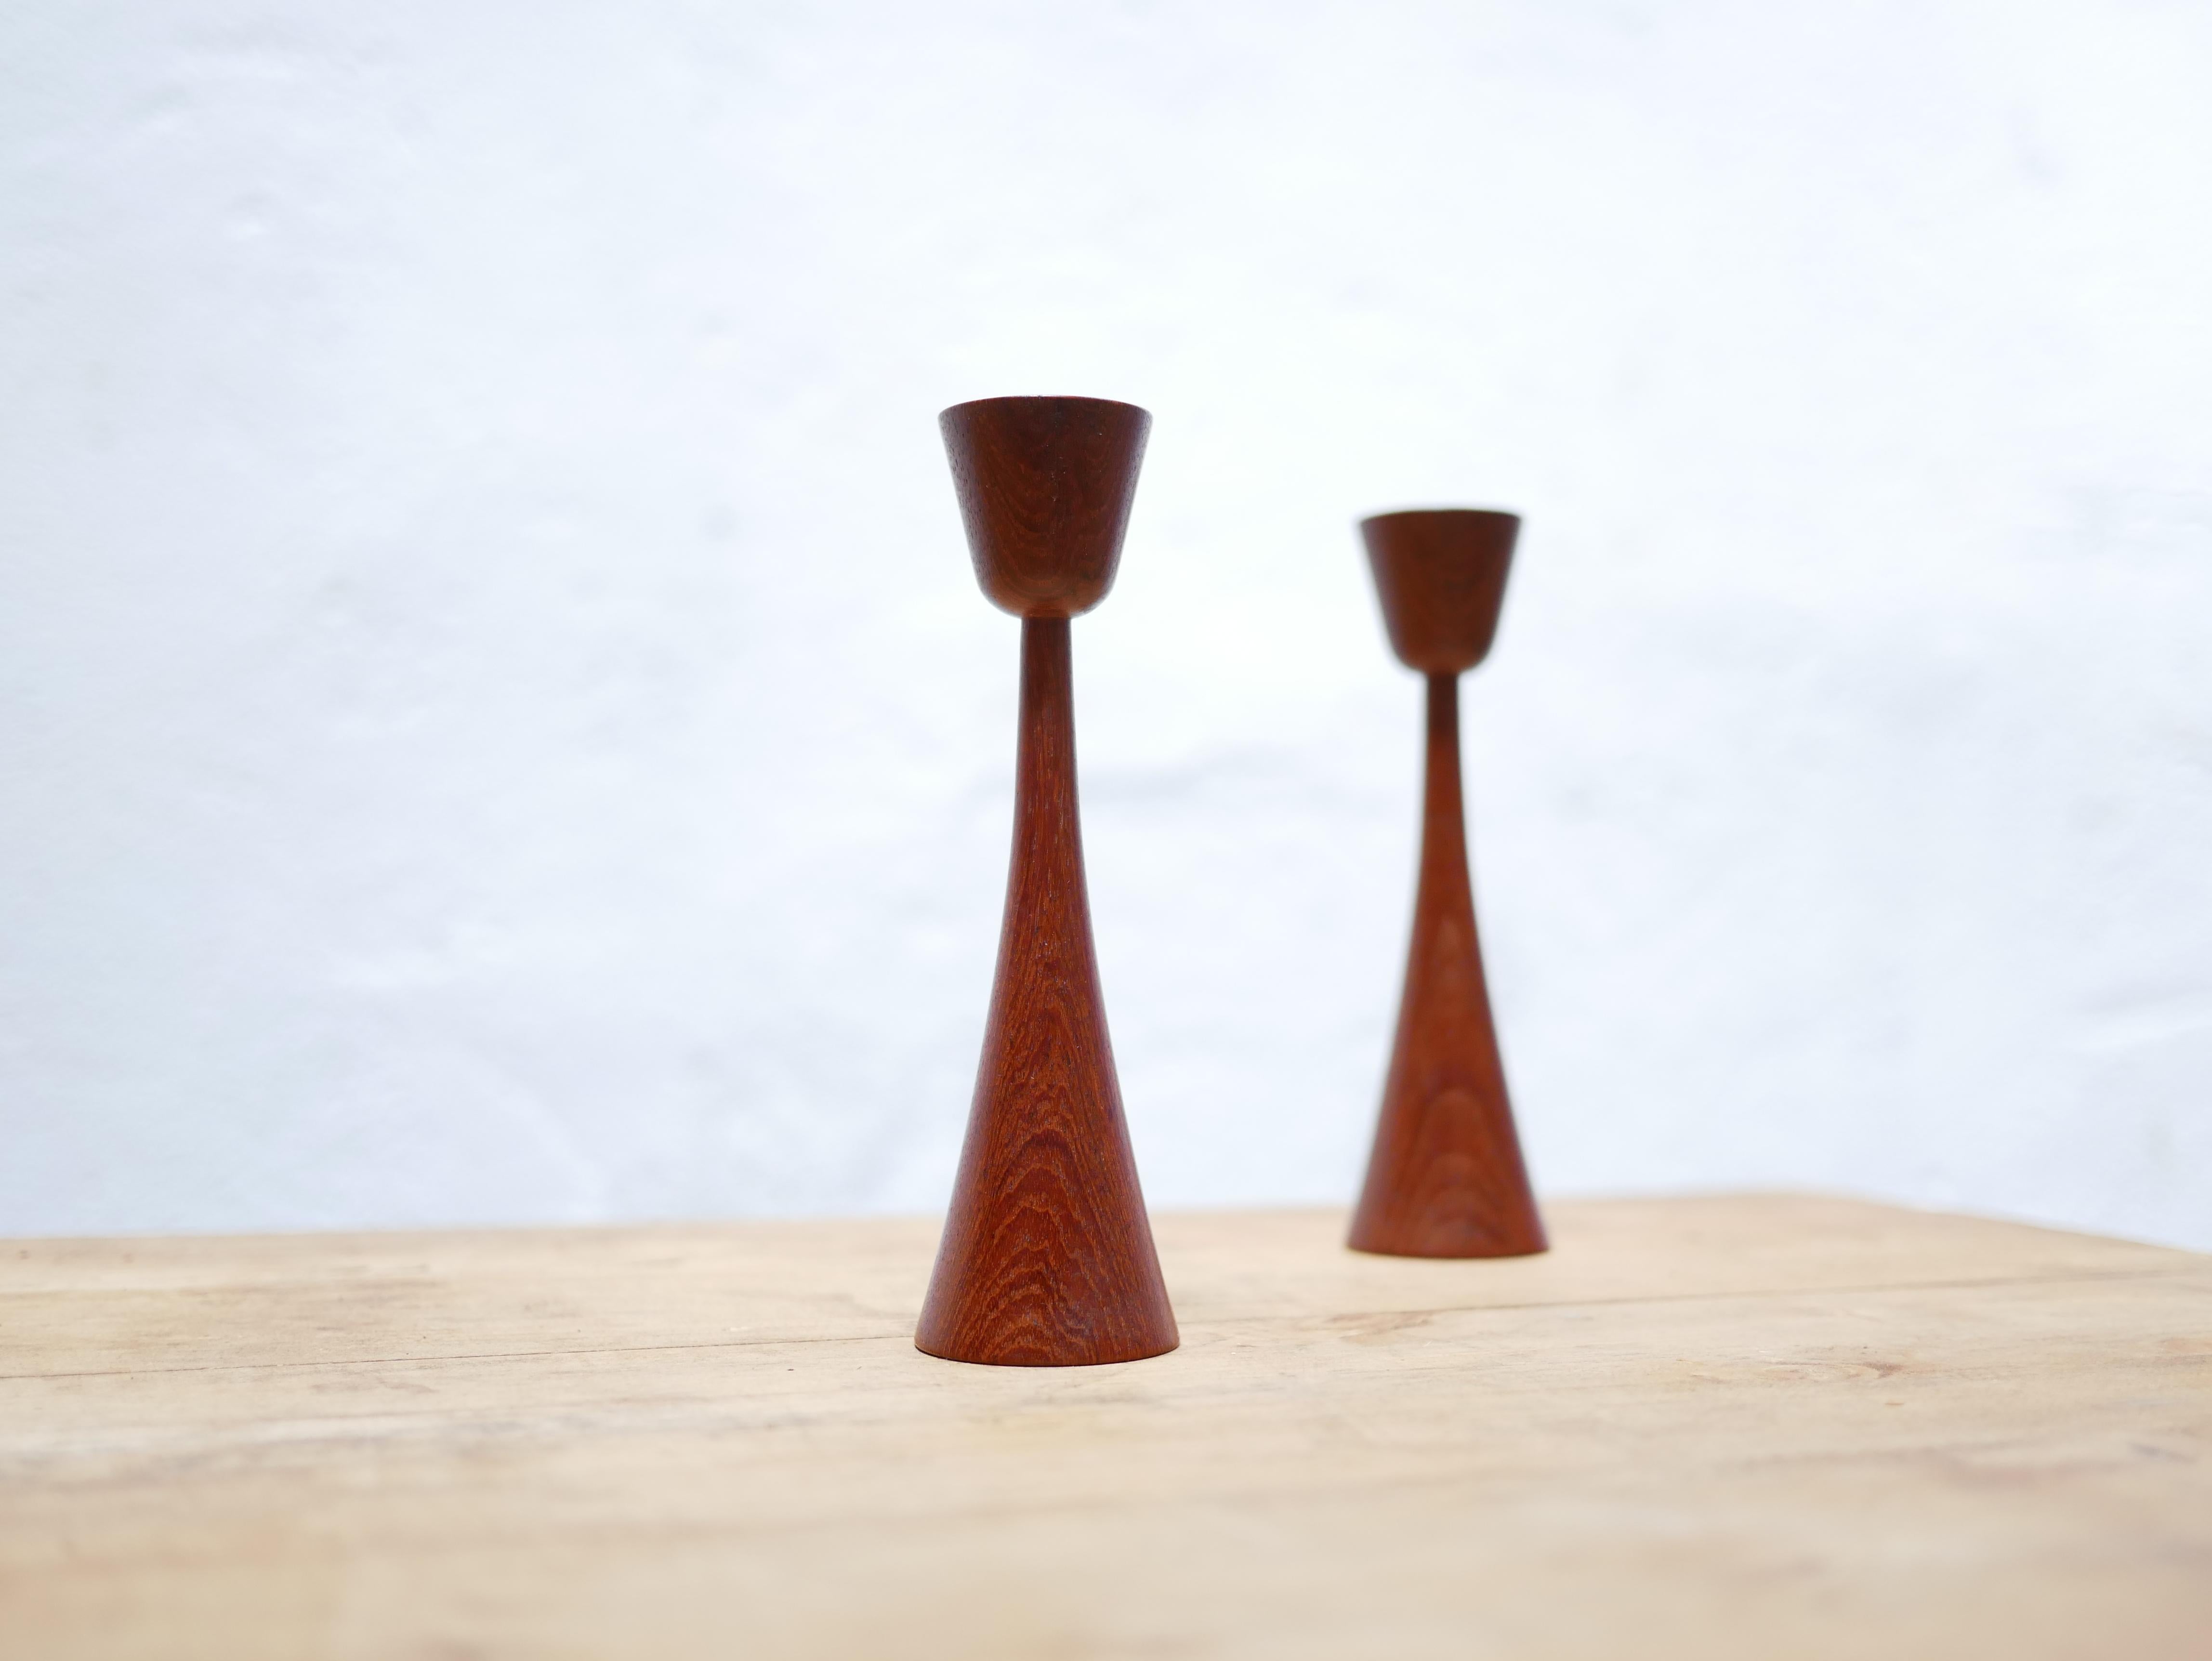 Pair of Scandinavian teak candlesticks produced in Denmark in the 1960s.

Design, aesthetic and trendy, the candlesticks will be perfect in a natural and refined decoration.
We simply imagine them placed on a shelf or piece of furniture, on the